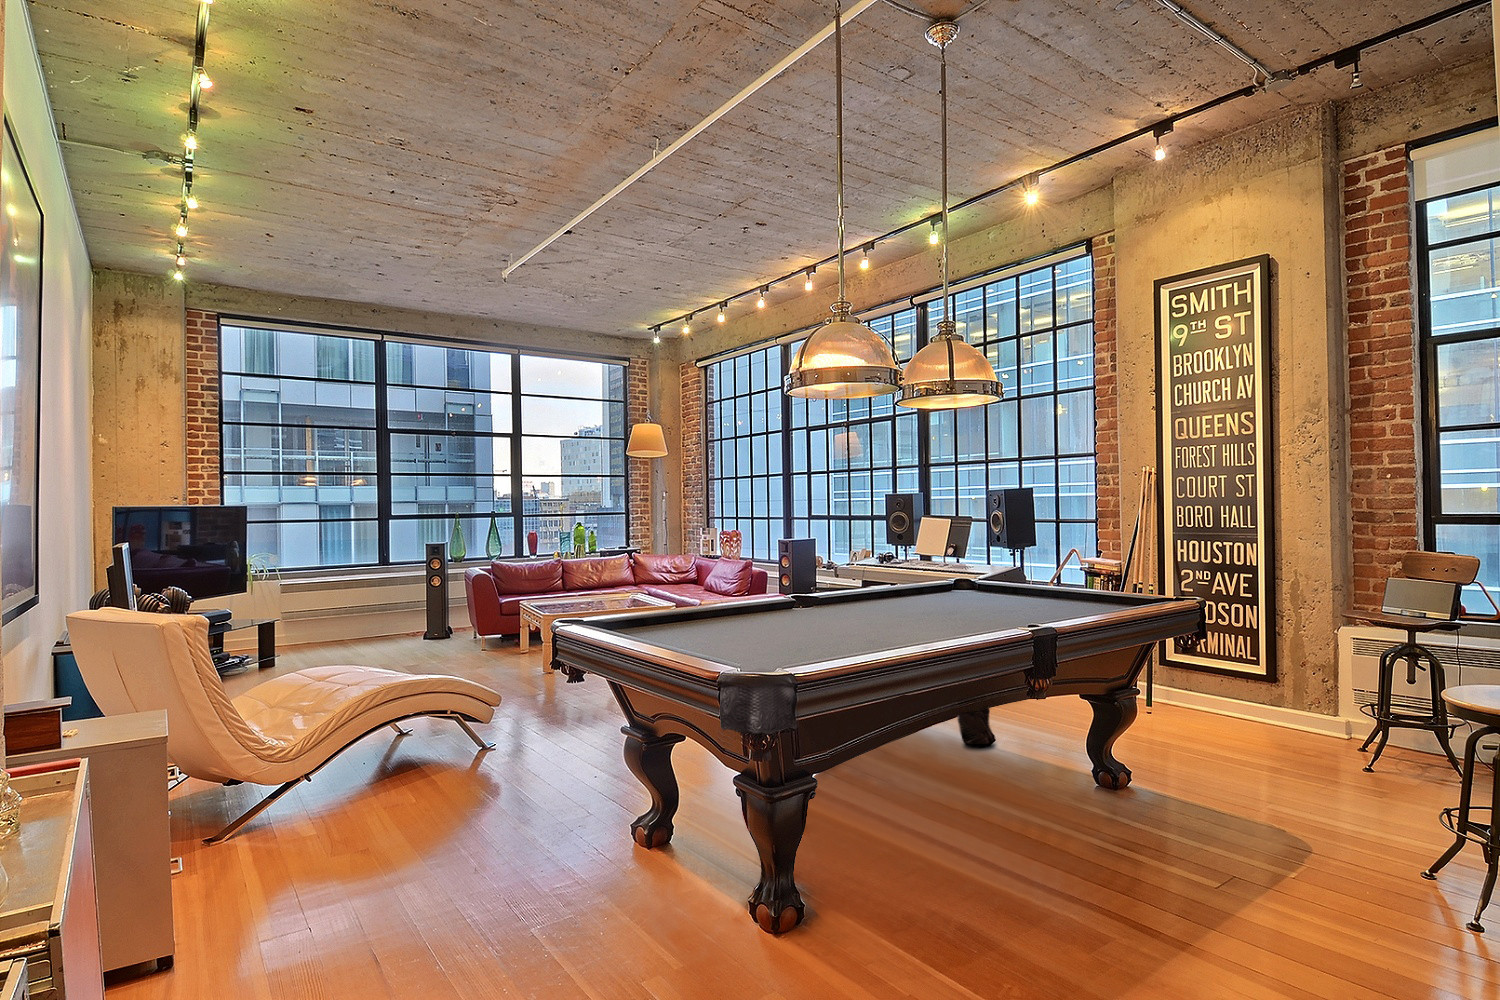 Urban Industrial Chic Loft Pool Table room setting - Industrial - Living  Room - Montreal - by Palason Billiards | Houzz